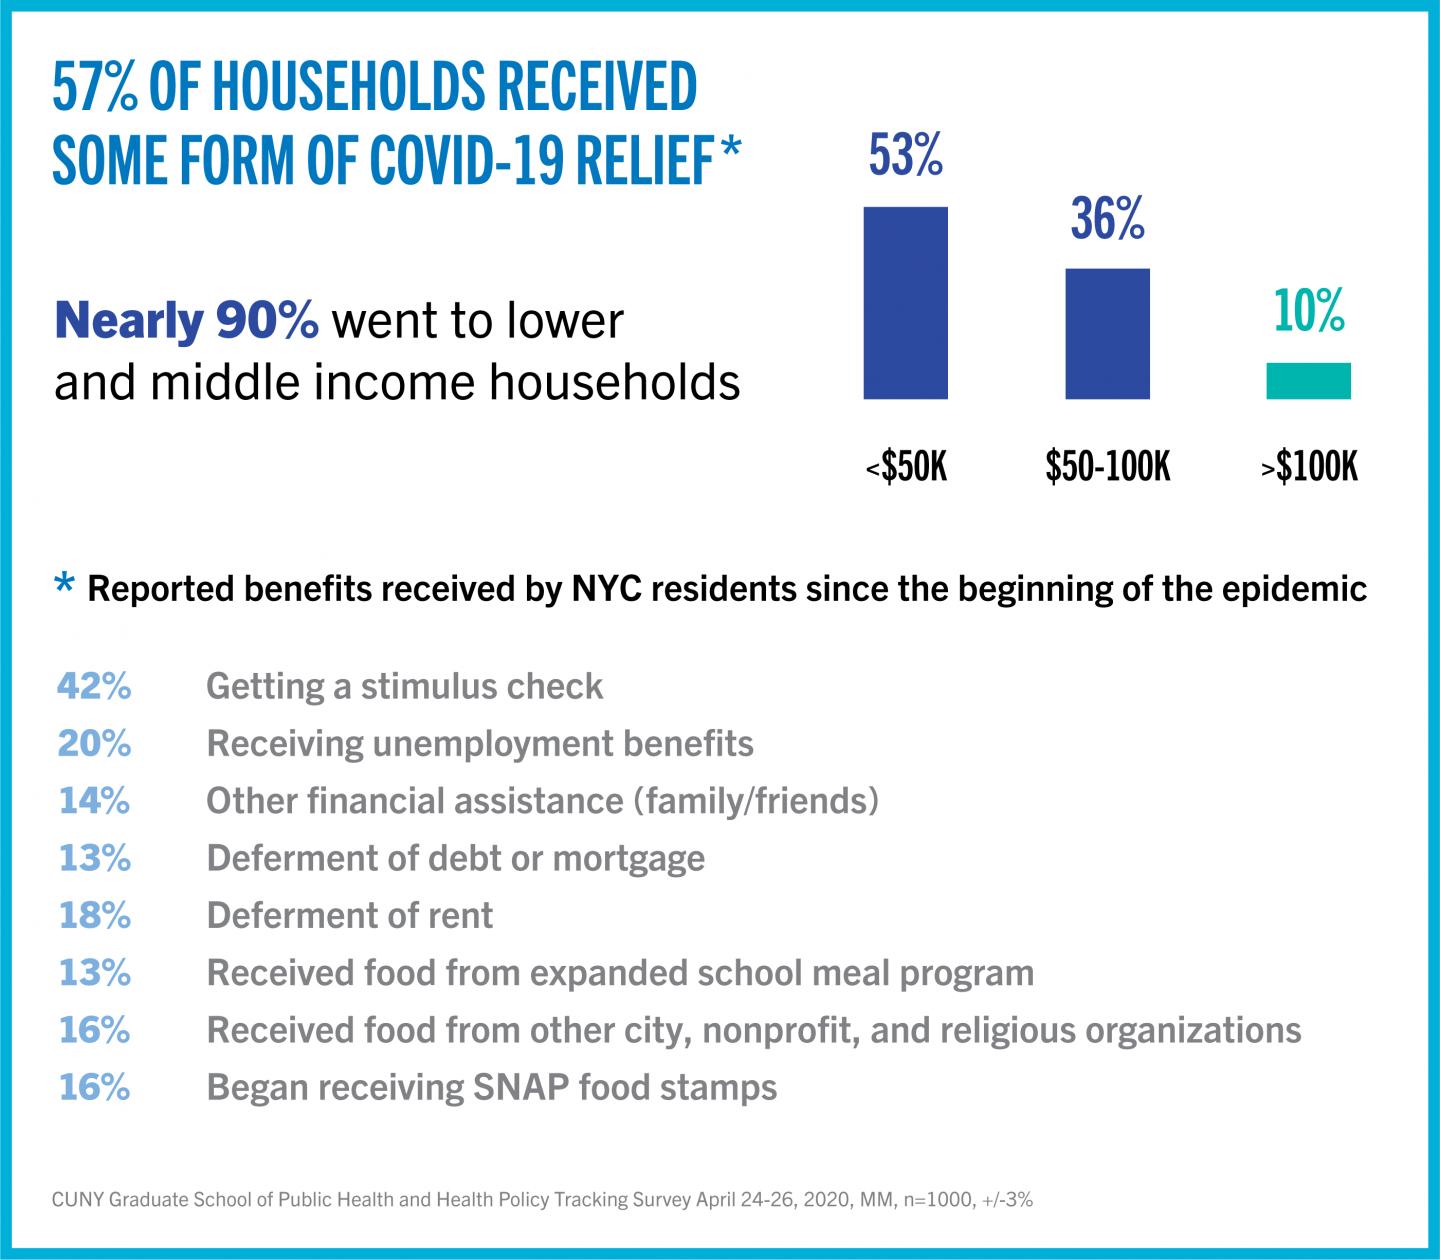 Households receiving some form of COVID-19 relief